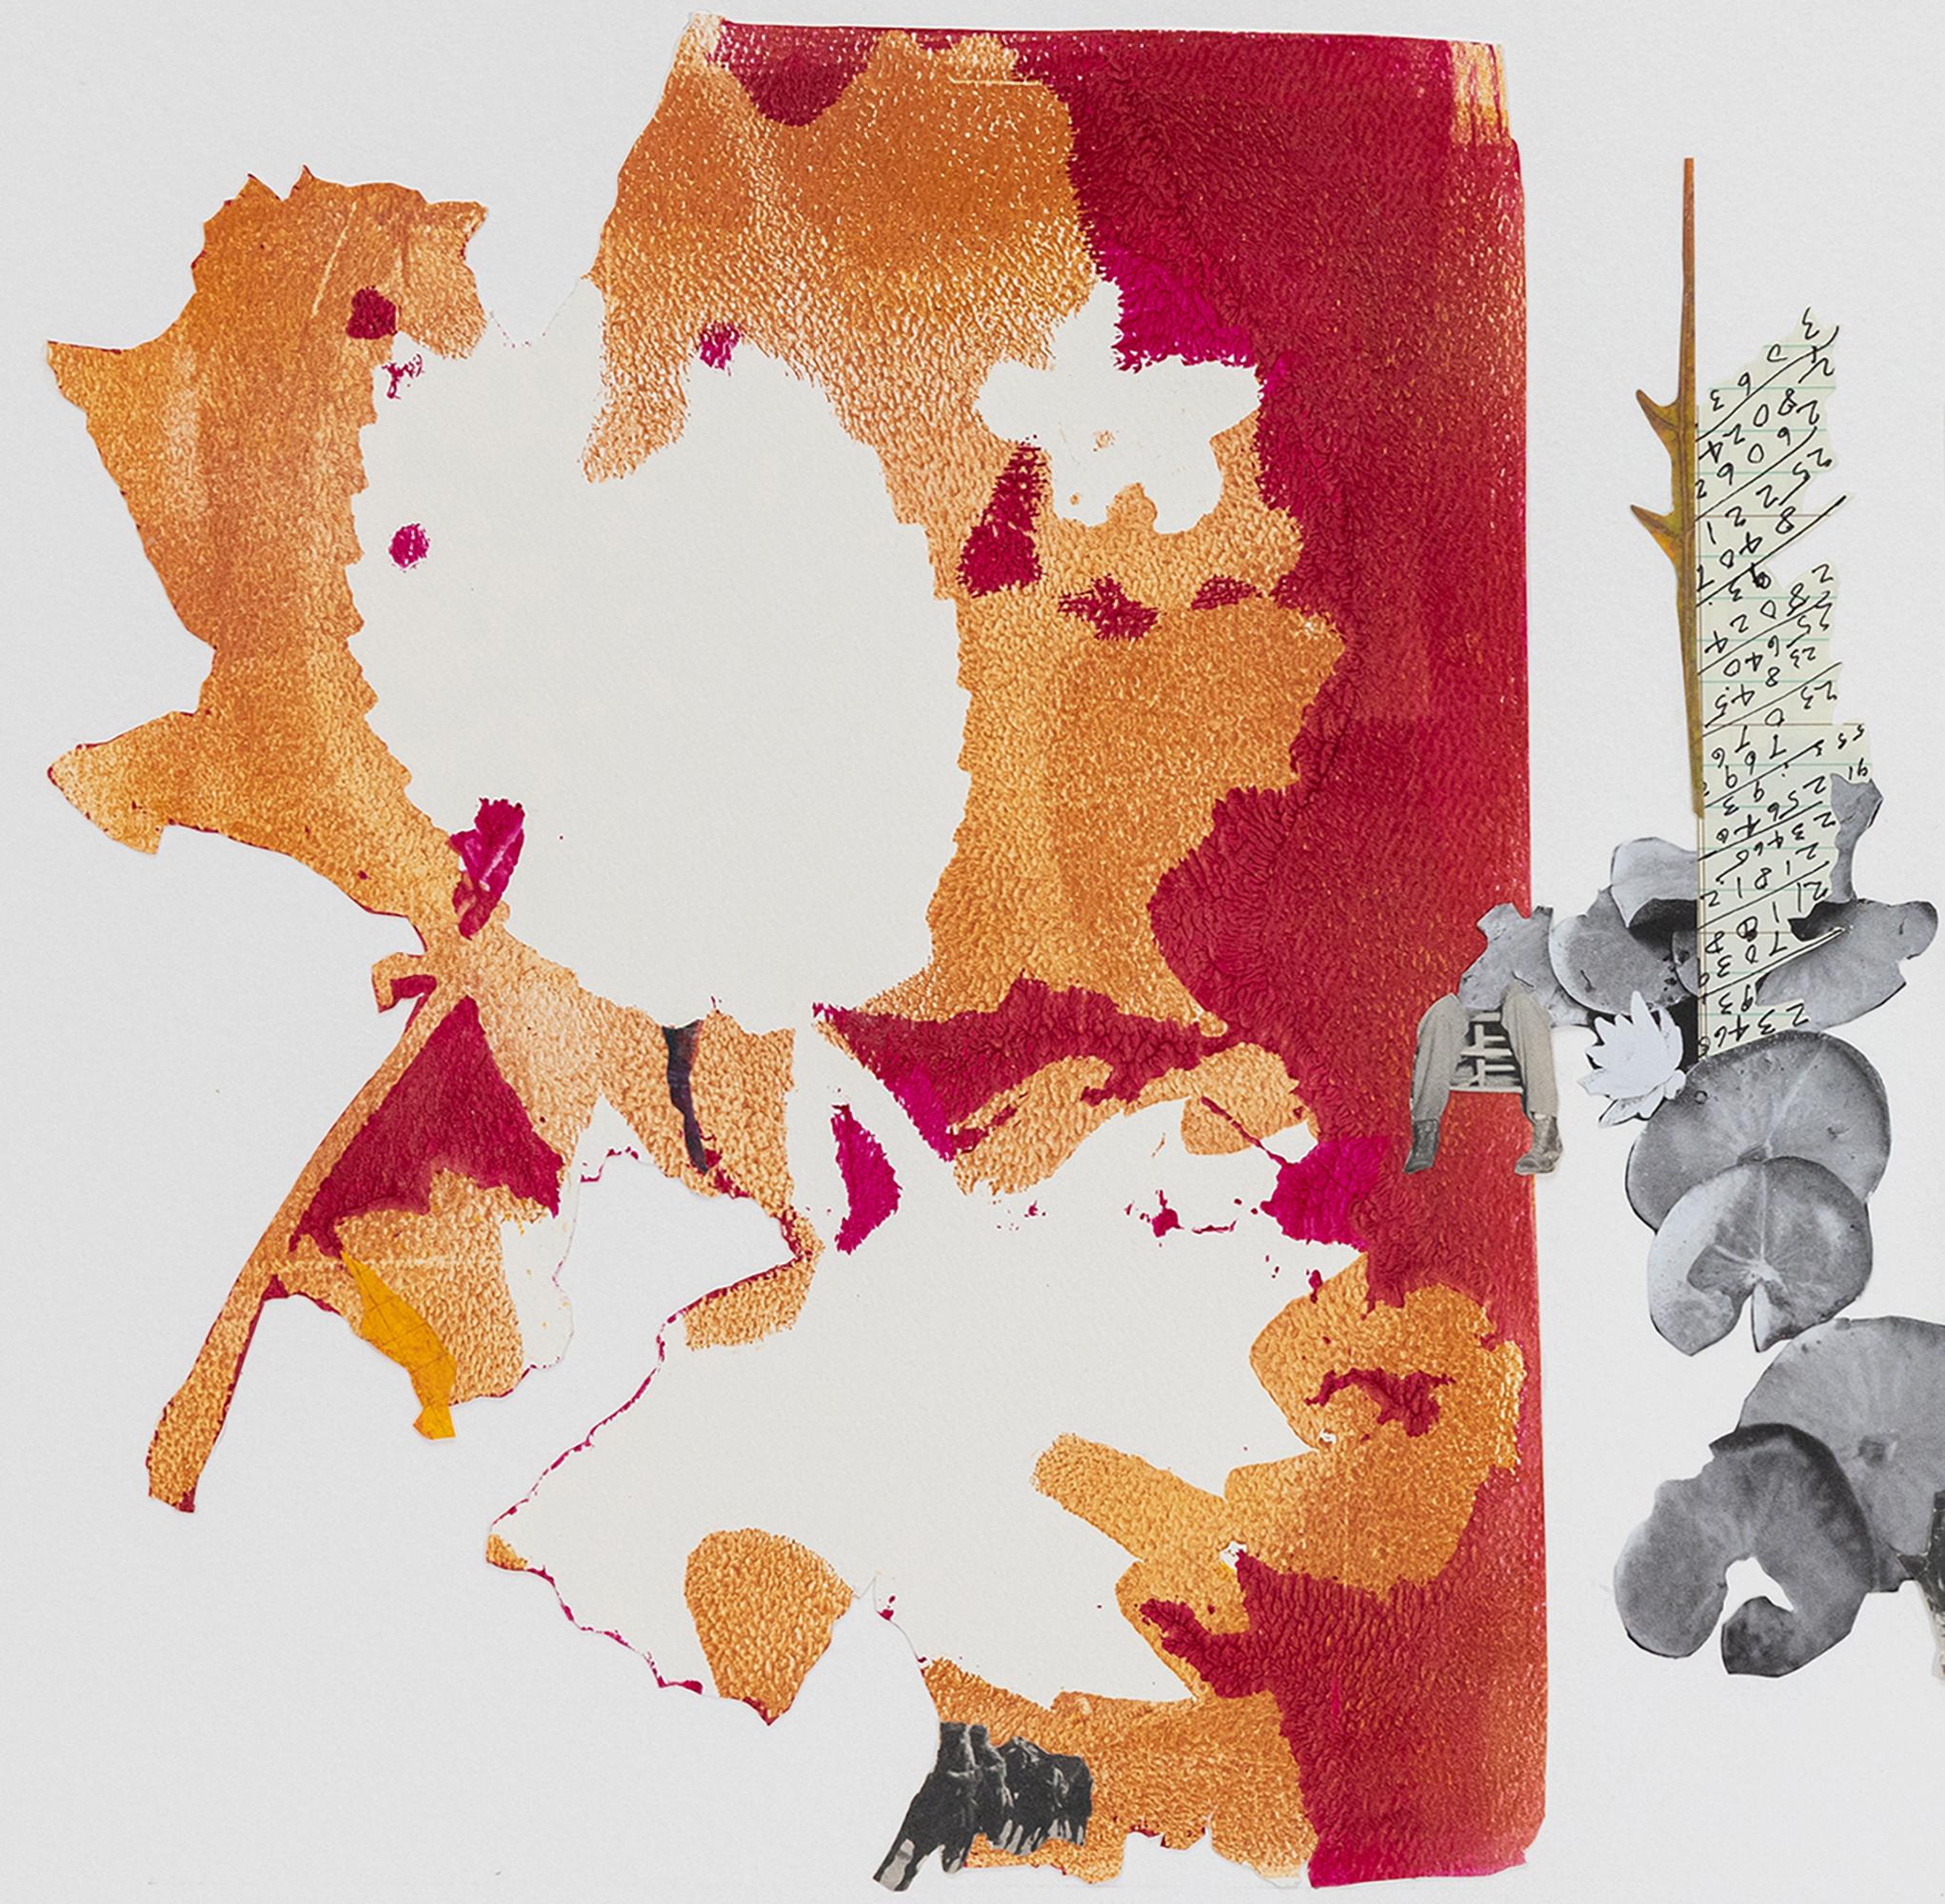 Monica DeSalvo’s “Where are the Pants” is an 18 x 24 inch surreal mixed media collage comprised of a red and orange acrylic monotype on felt textured paper with cut-out leaf forms, and an abstract collage on cream ledger paper with black distressed